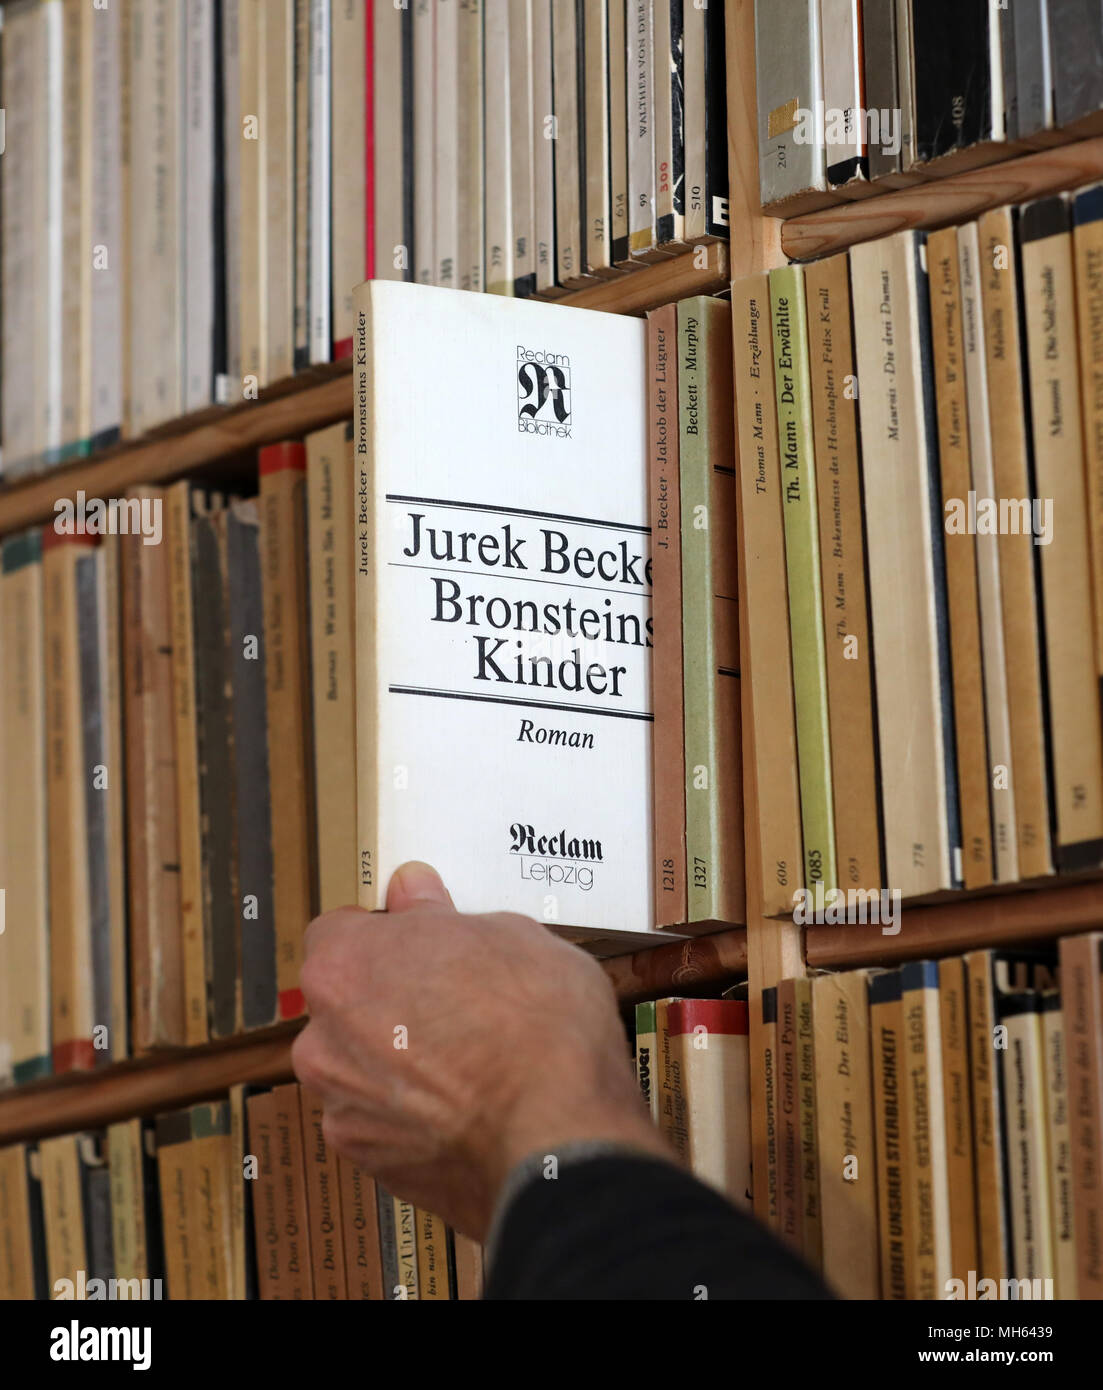 19 April 2018, Rostock, Germany: Bookseller Frank Weisleder stands in front of the book wall with his complete collection of 1380 volumes of the 'Reclam Universalbibliothek', which were published in the GDR between 1963 and 1990 in the Leipzig Reclam publishing house, and pulls out a volume by Jurek Becker. He has been collecting for over 20 years. (to 'Rostock: complete private collection of Reclamheften from GDR time' from 01.05.2018) Photo: Bernd Wüstneck/dpa Stock Photo